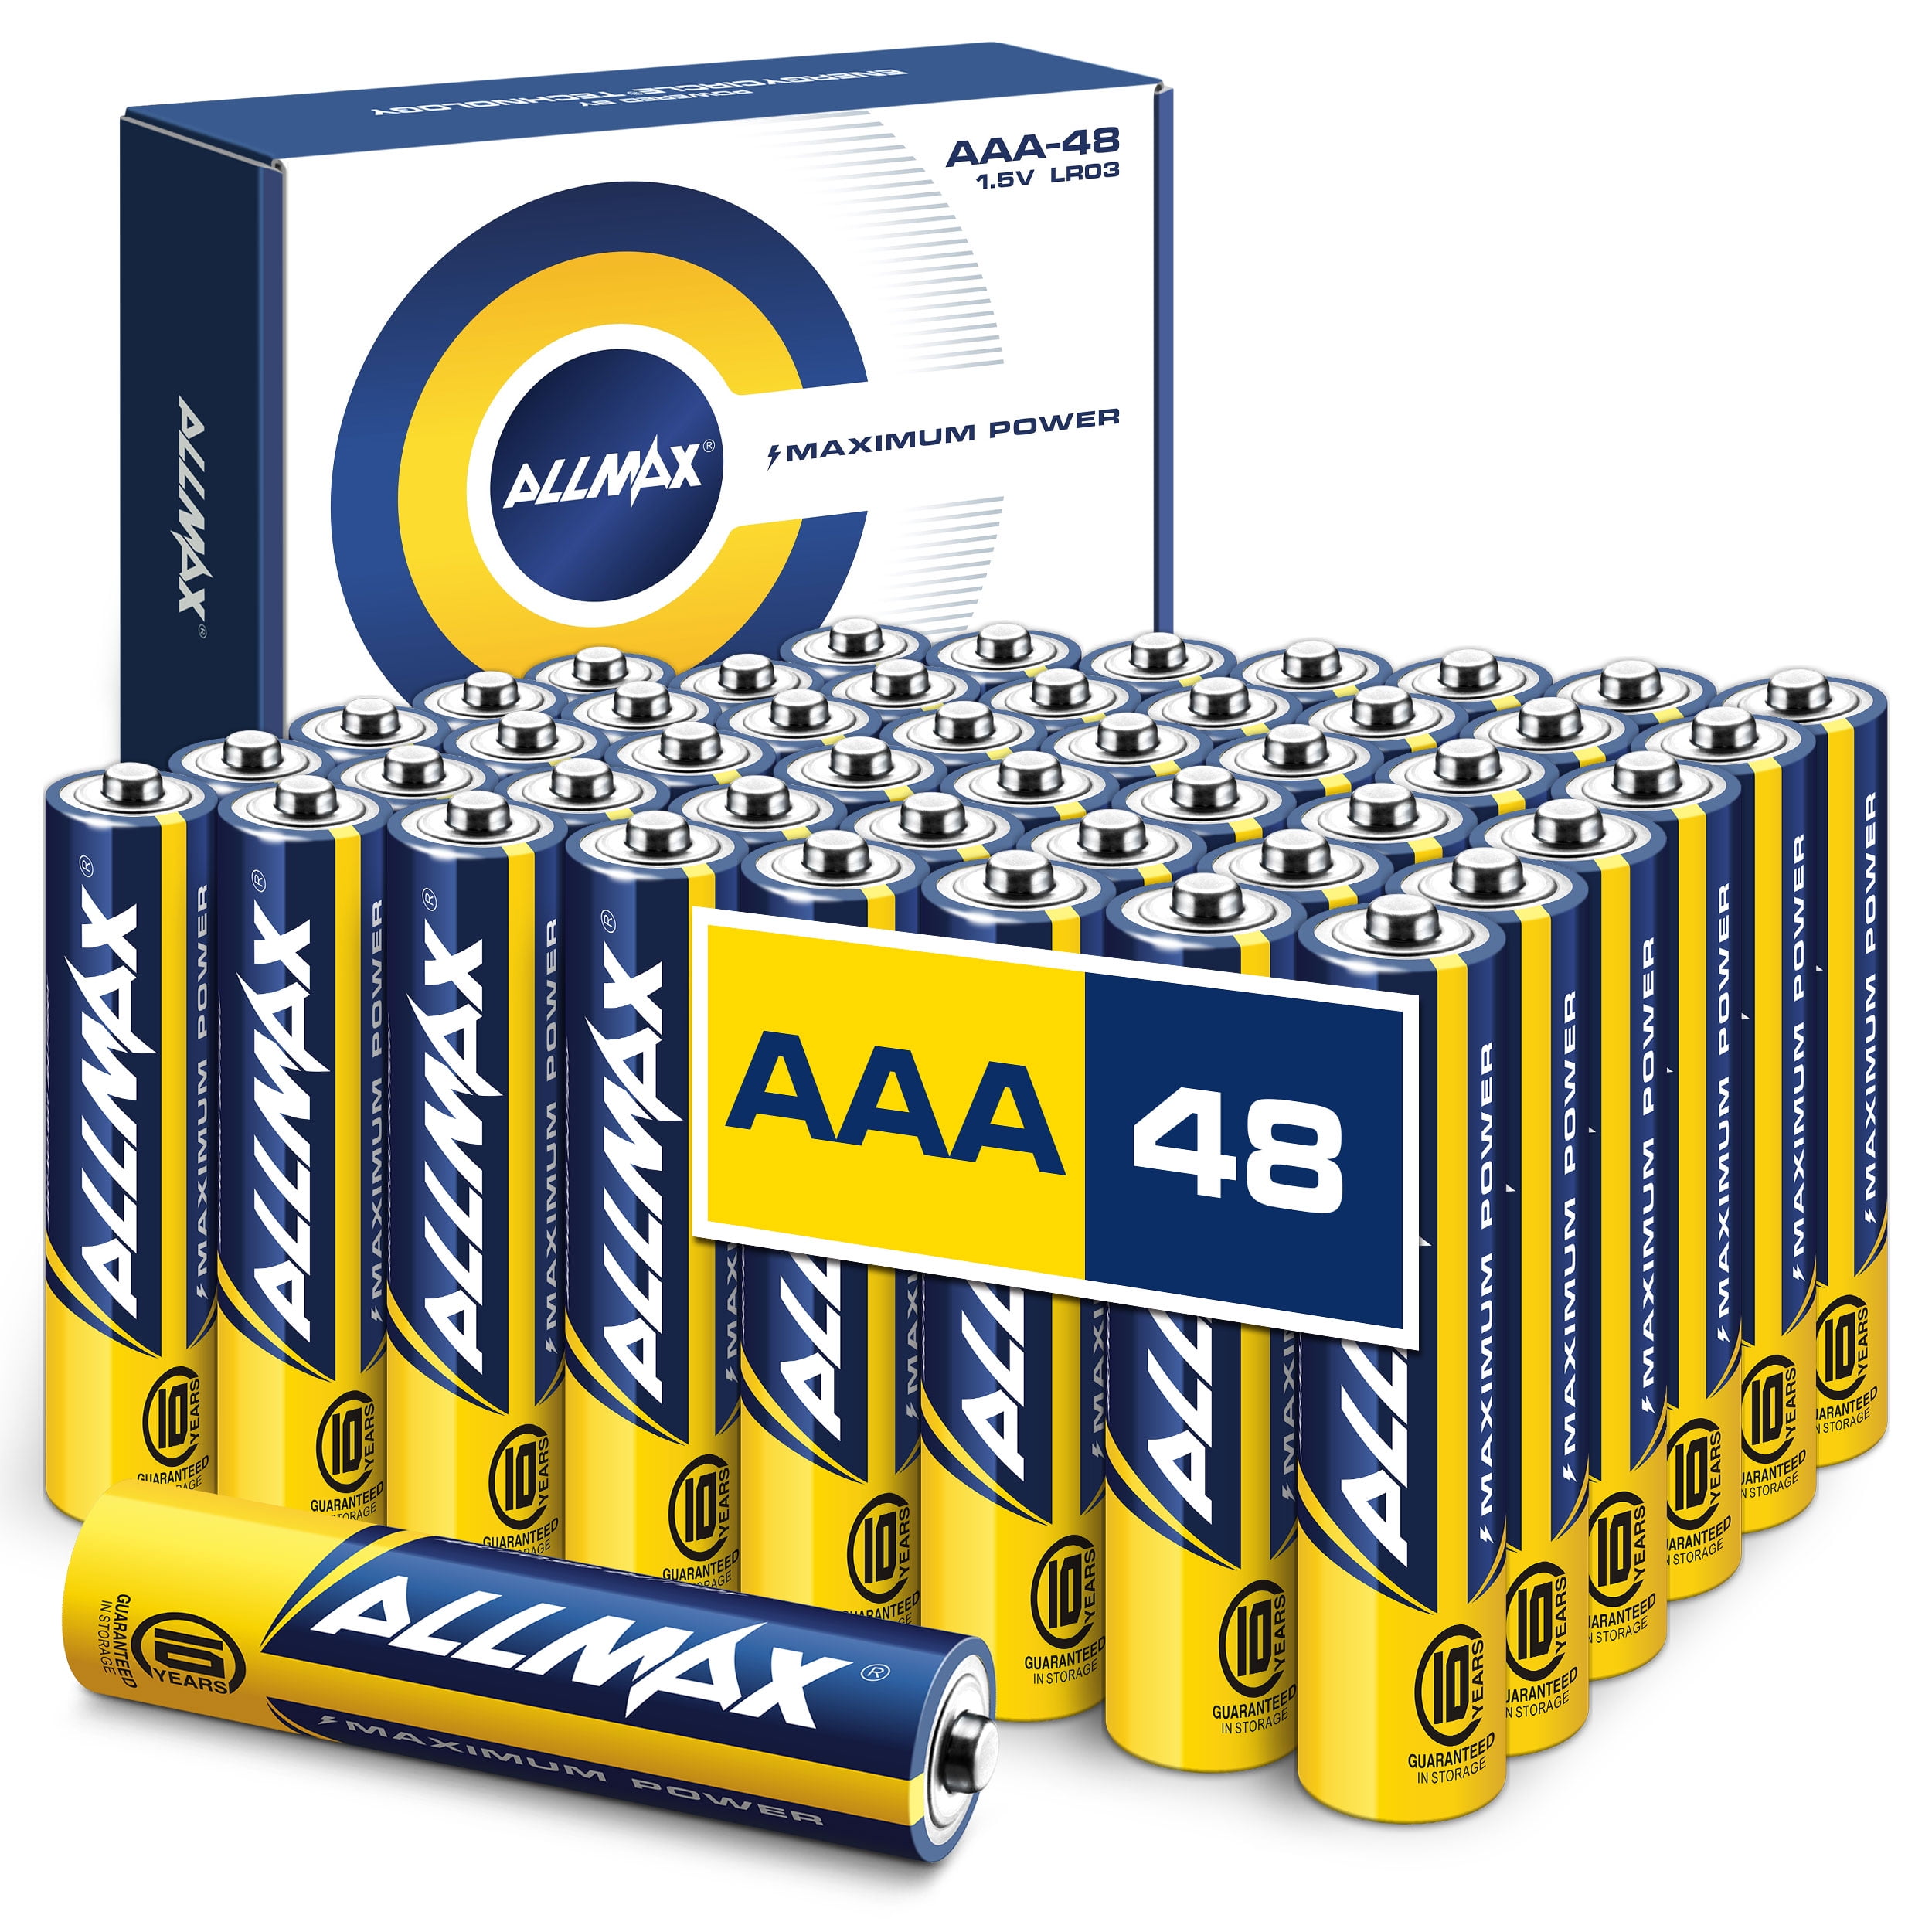 Energizer MAX AA Batteries and AAA Batteries (48 Pack Total